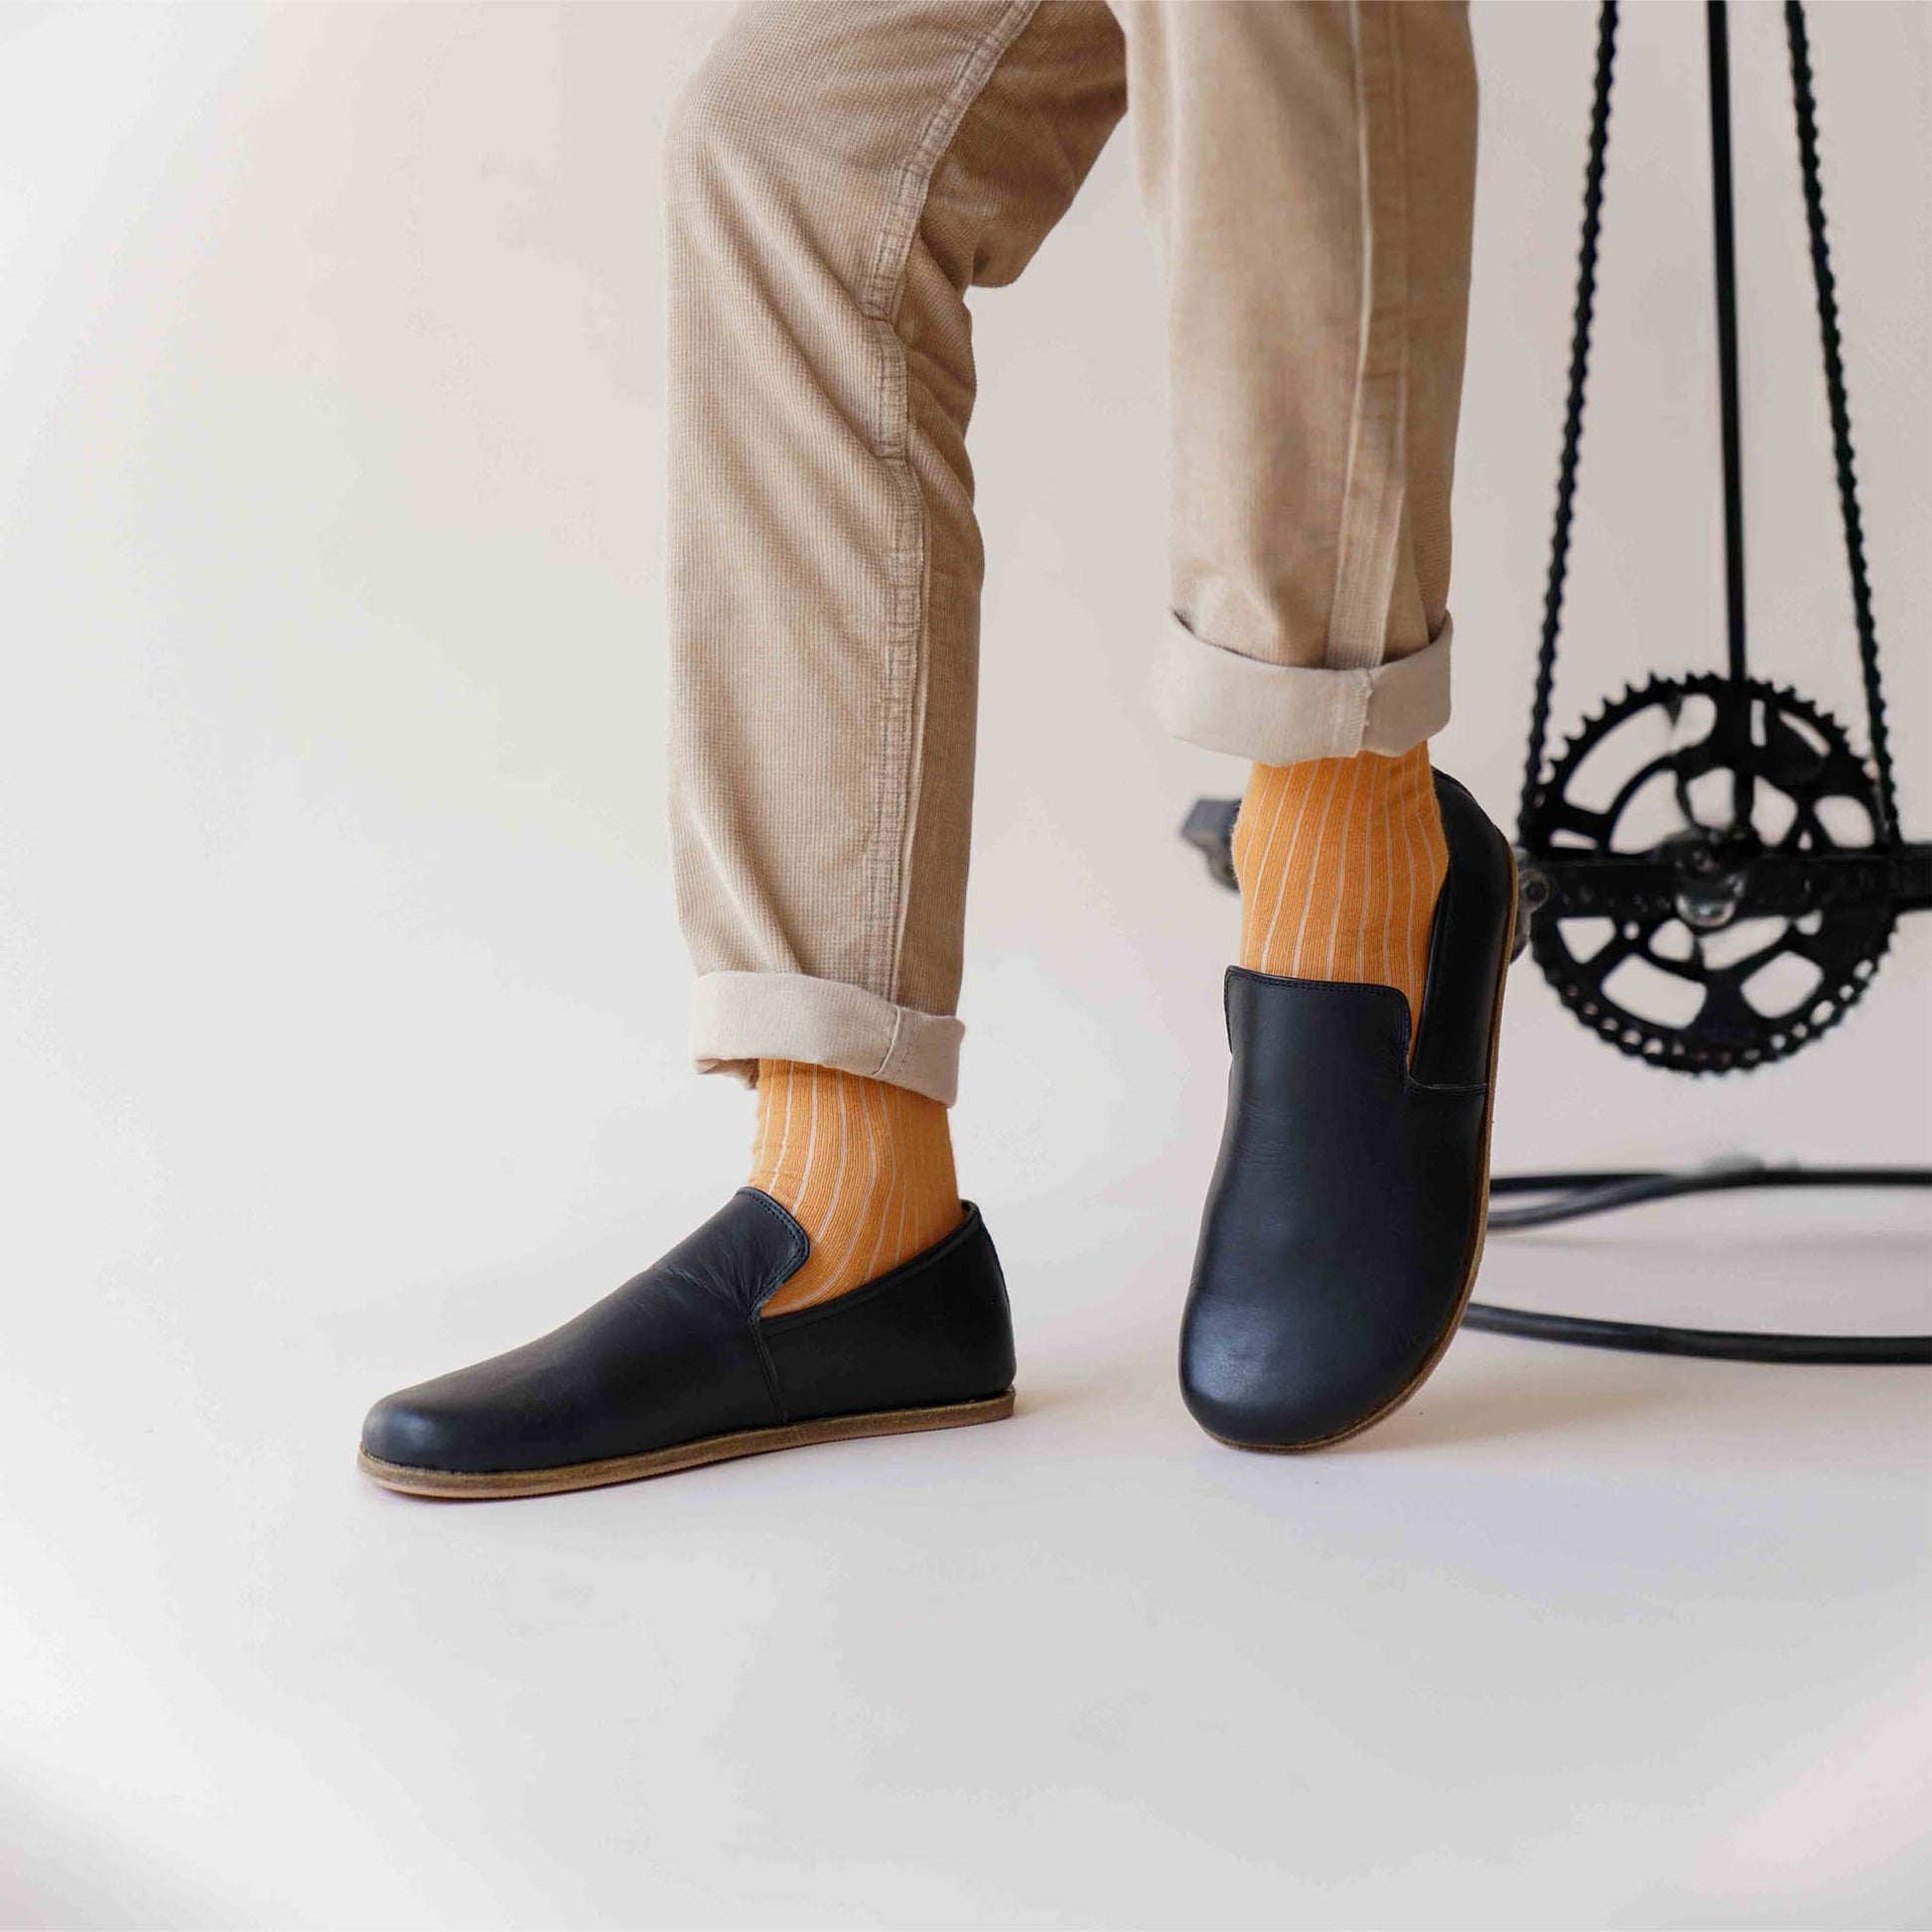 Man sitting on stool wearing Aeolia Leather Barefoot Men Loafers in black with beige pants and orange socks - shop at pelanir.com.